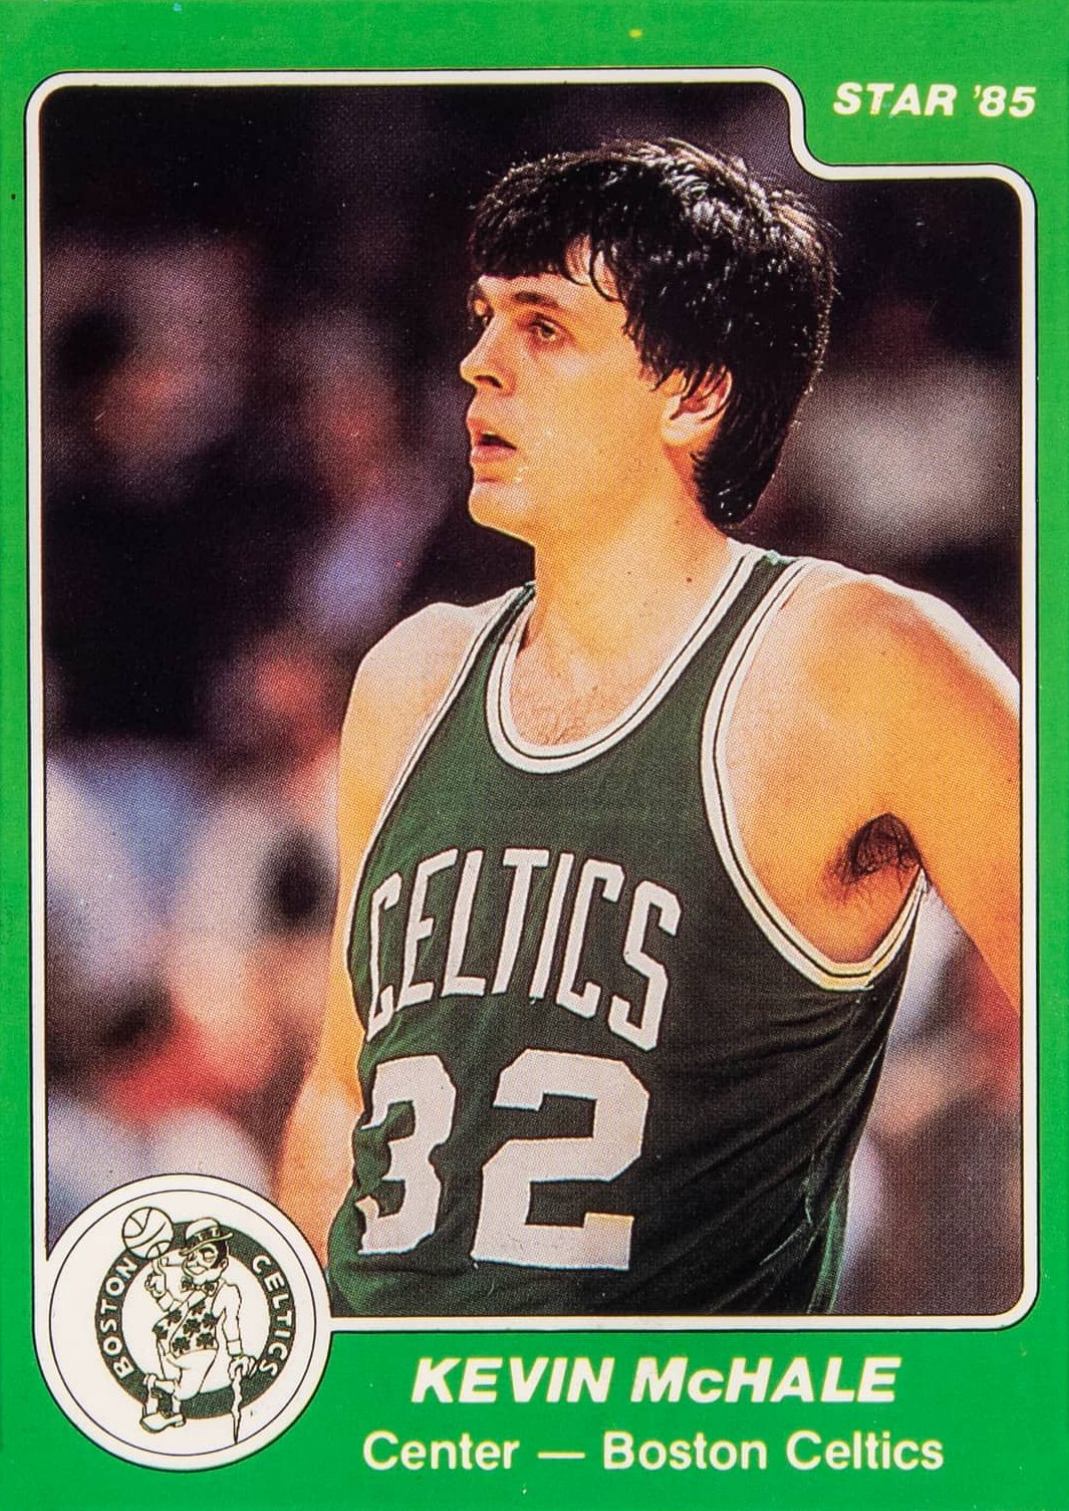 1984 Star Kevin McHale #9 Basketball Card